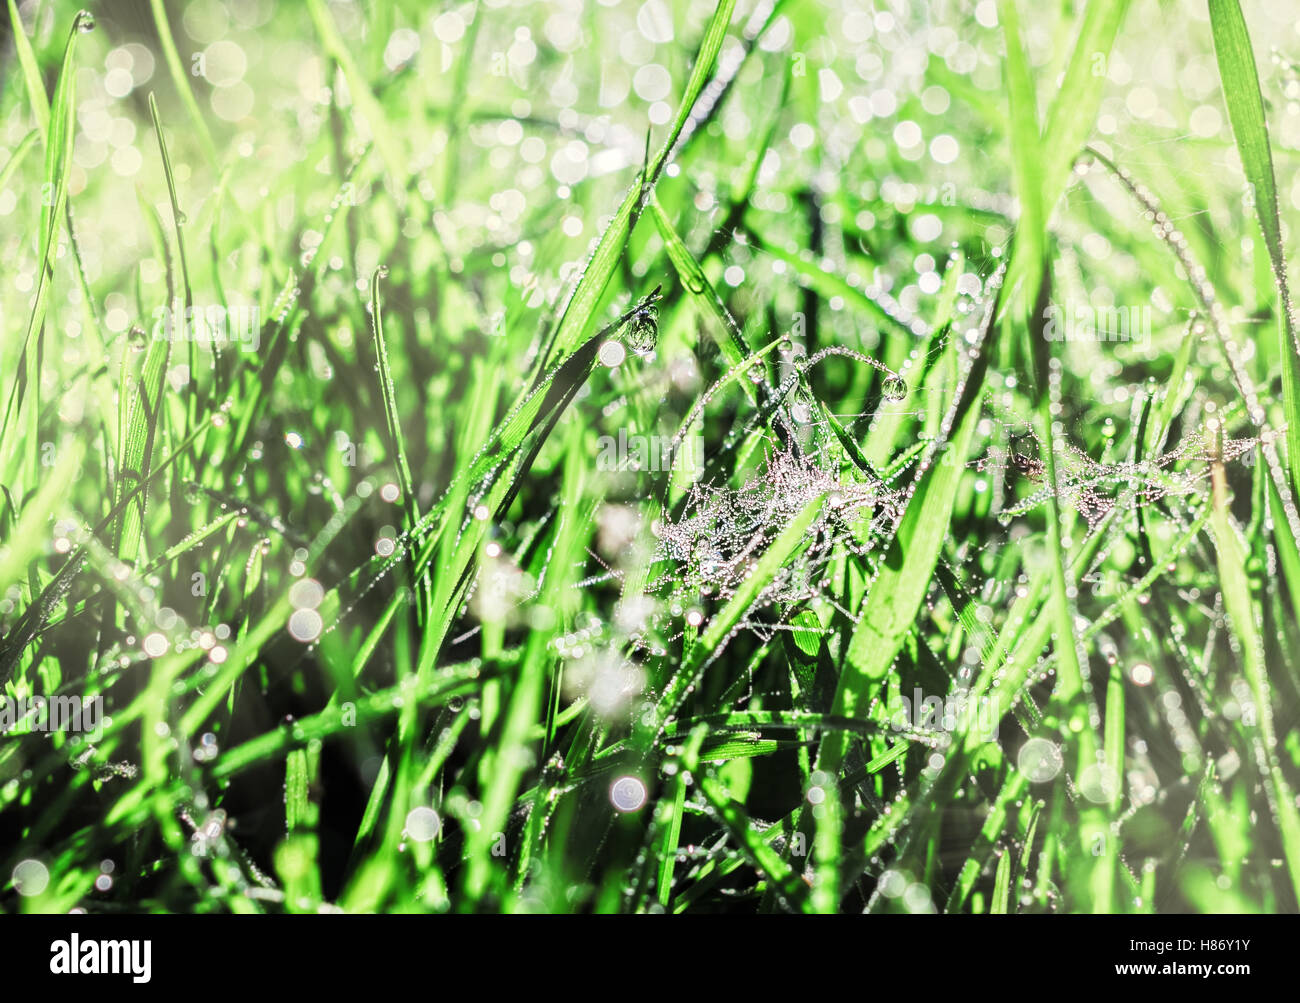 Cobwebs and dew in morning sun grass Stock Photo